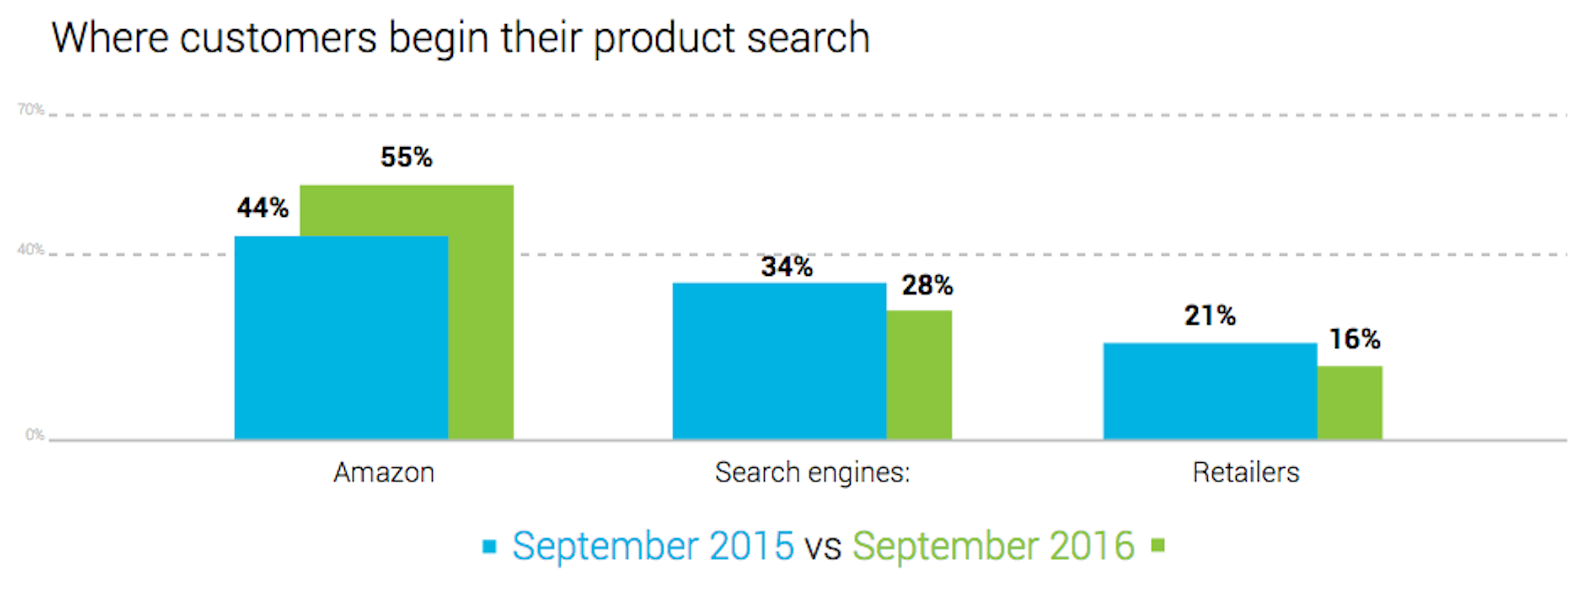 Graph BloomReach illustrating where online product searches begin